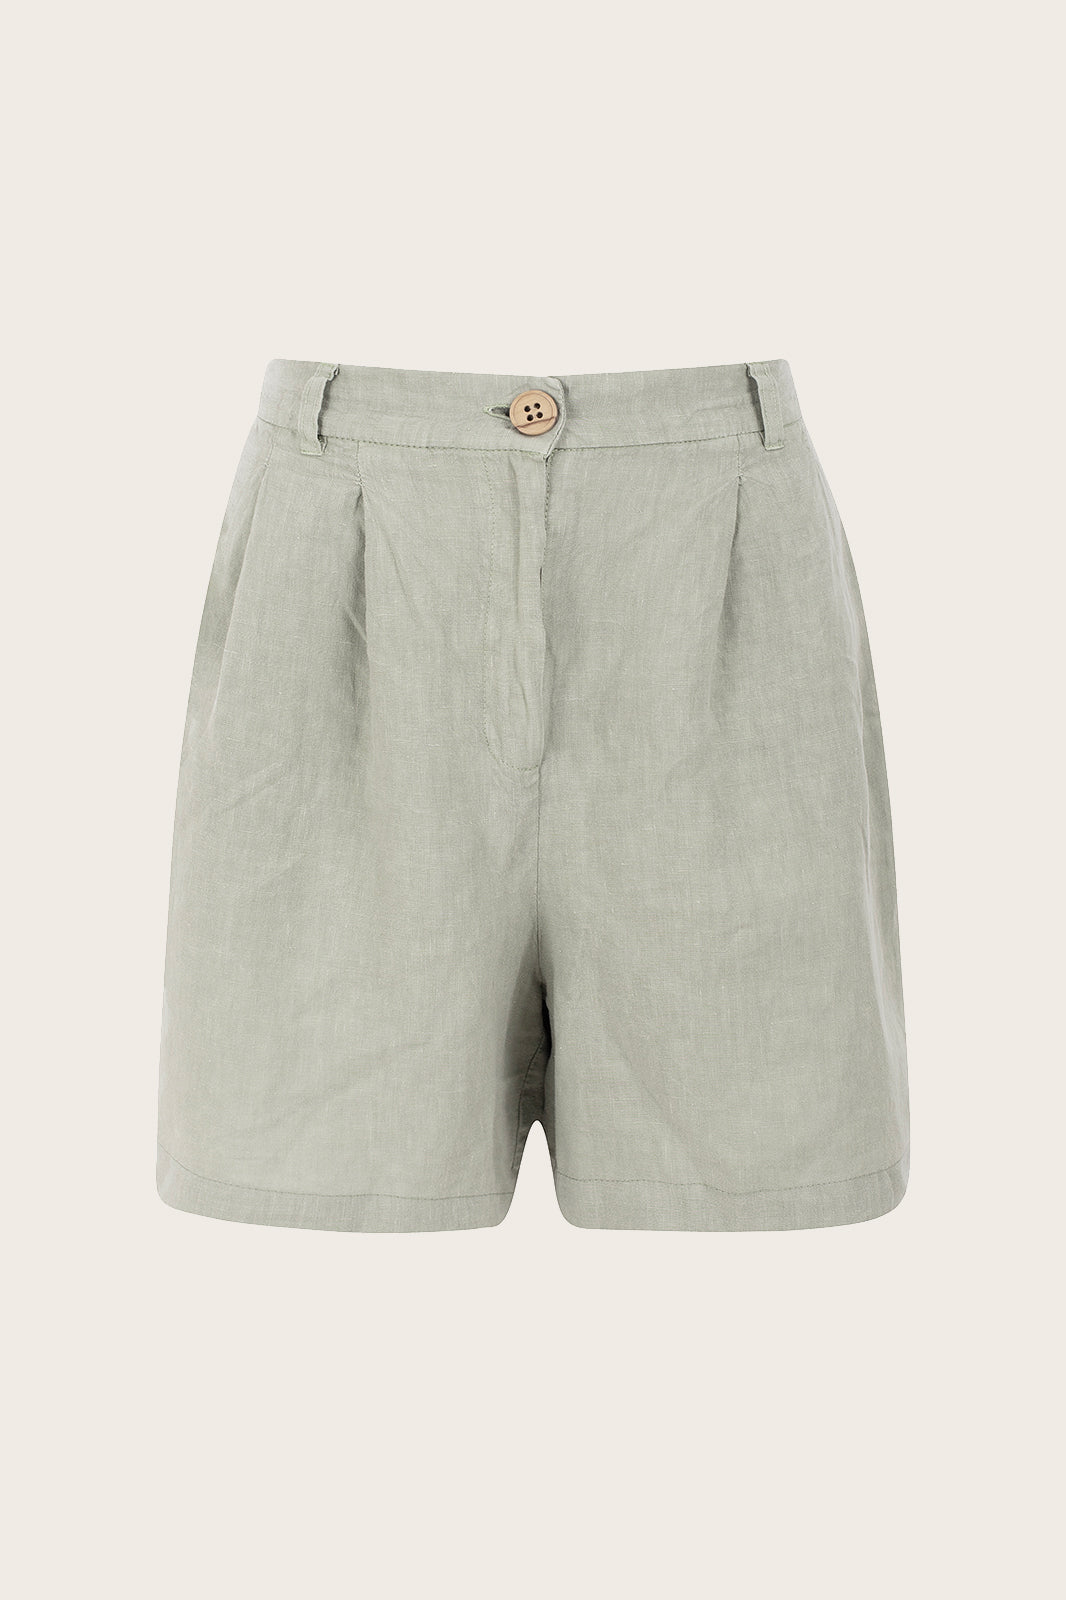 Naz women's breathable linen summer shorts in sage green. High-waisted relaxed wide fit with hidden pockets. Made in Portugal